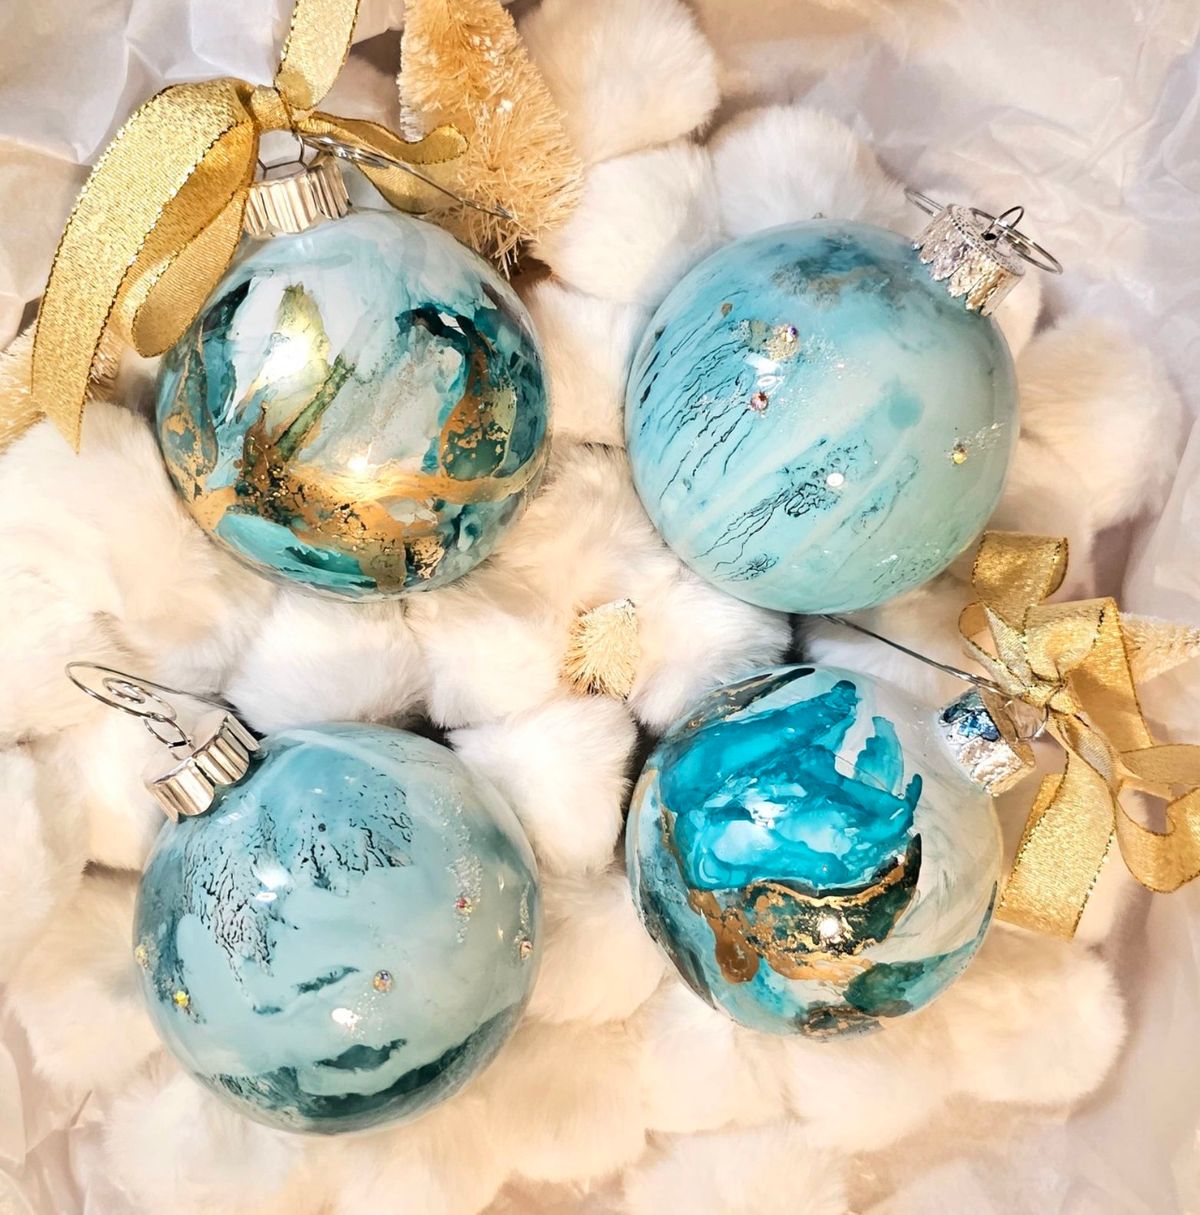 Fluid Art with alcohol ink set of 4 ornaments